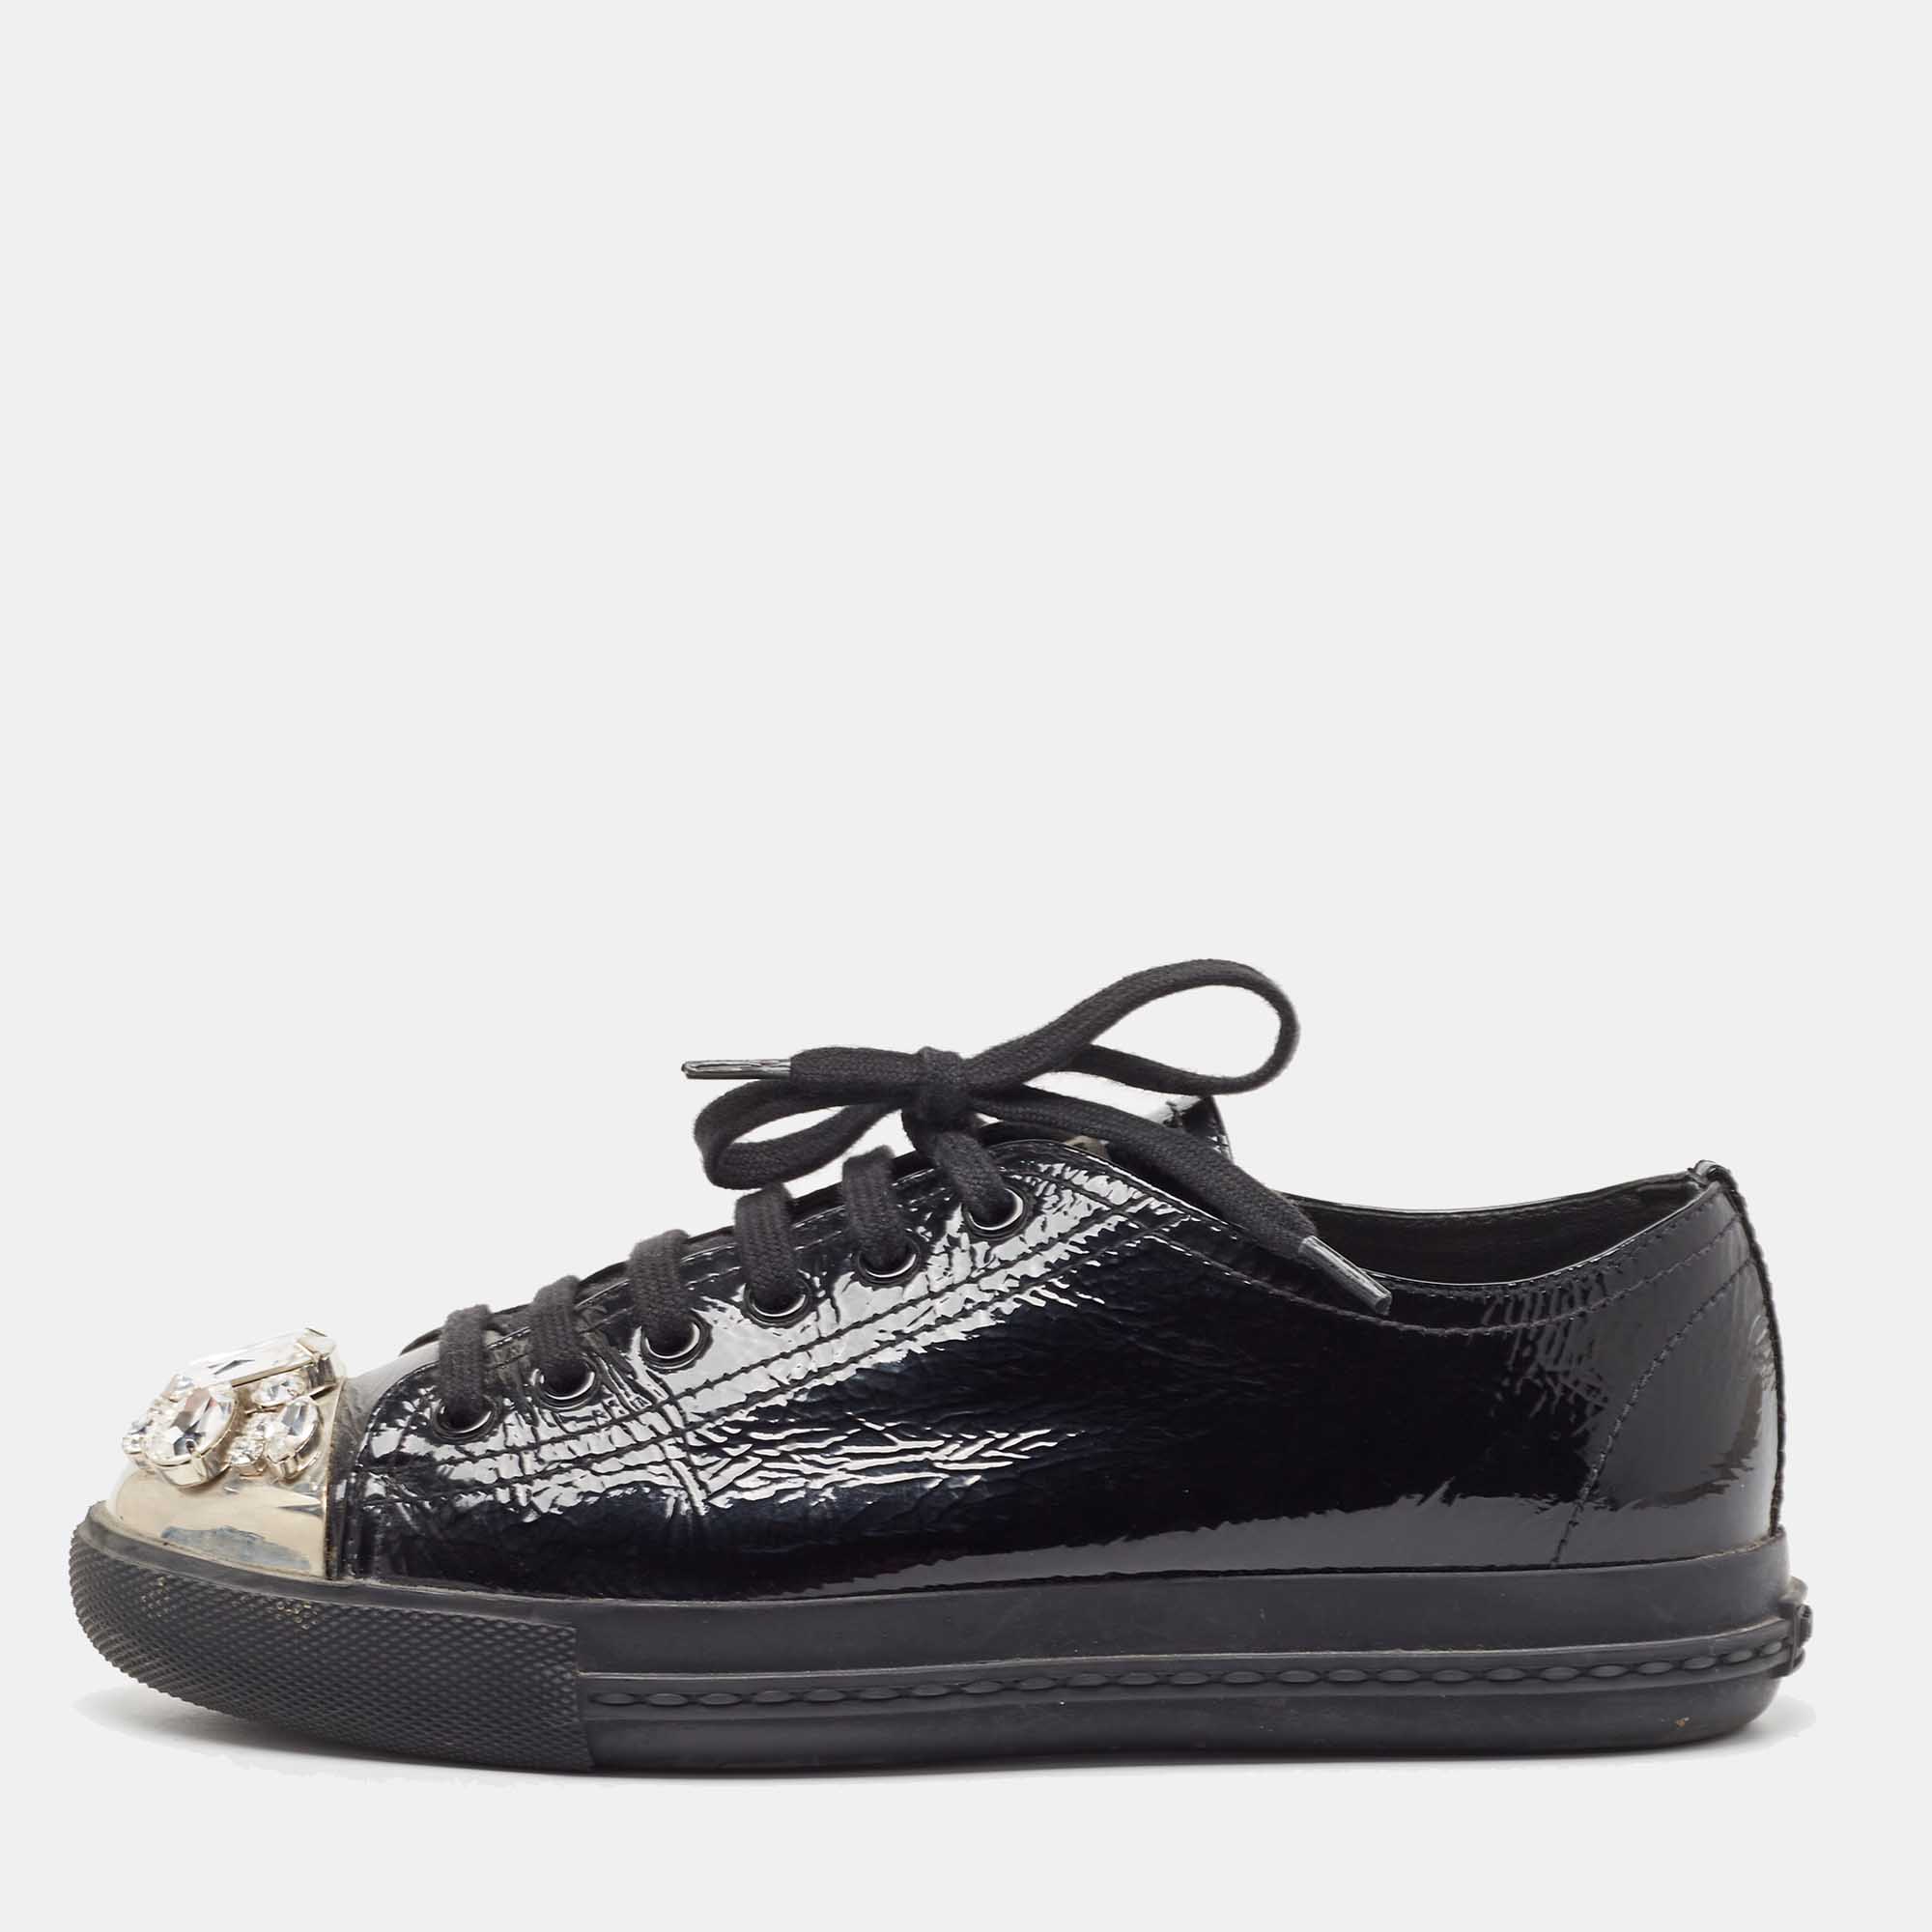 Pre-owned Miu Miu Black Patent Leather Crystal Studded Sneakers Size 37